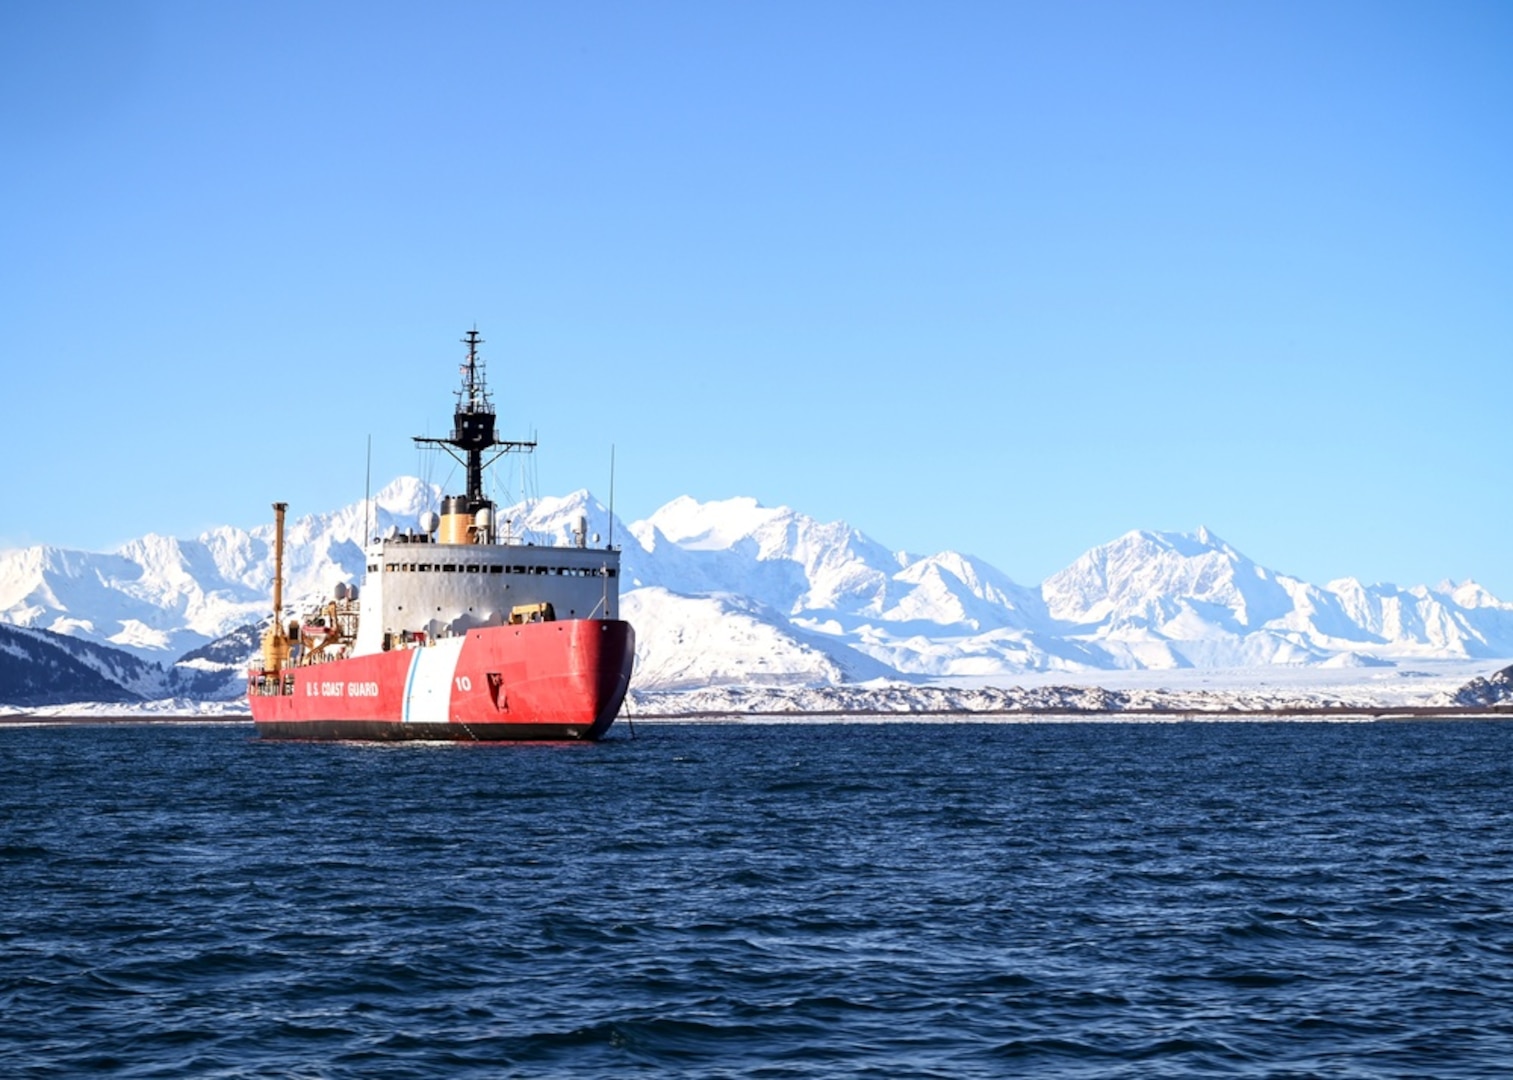 The Seattle-based Coast Guard Cutter Polar Star (WAGB 10) sits at anchor in Taylor Bay, Alaska, Feb. 10, 2020, ahead of their scheduled logistics stop in Juneau, Alaska, near the end of their months-long Arctic deployment. In addition to Polar Star's strategic national security objectives, the nation's sole heavy icebreaker sailed north with scientists and researchers aboard to better understand how to operate year-round in Arctic waters. U.S. Coast Guard photo by Petty Officer 1st Class Cindy Oldham.